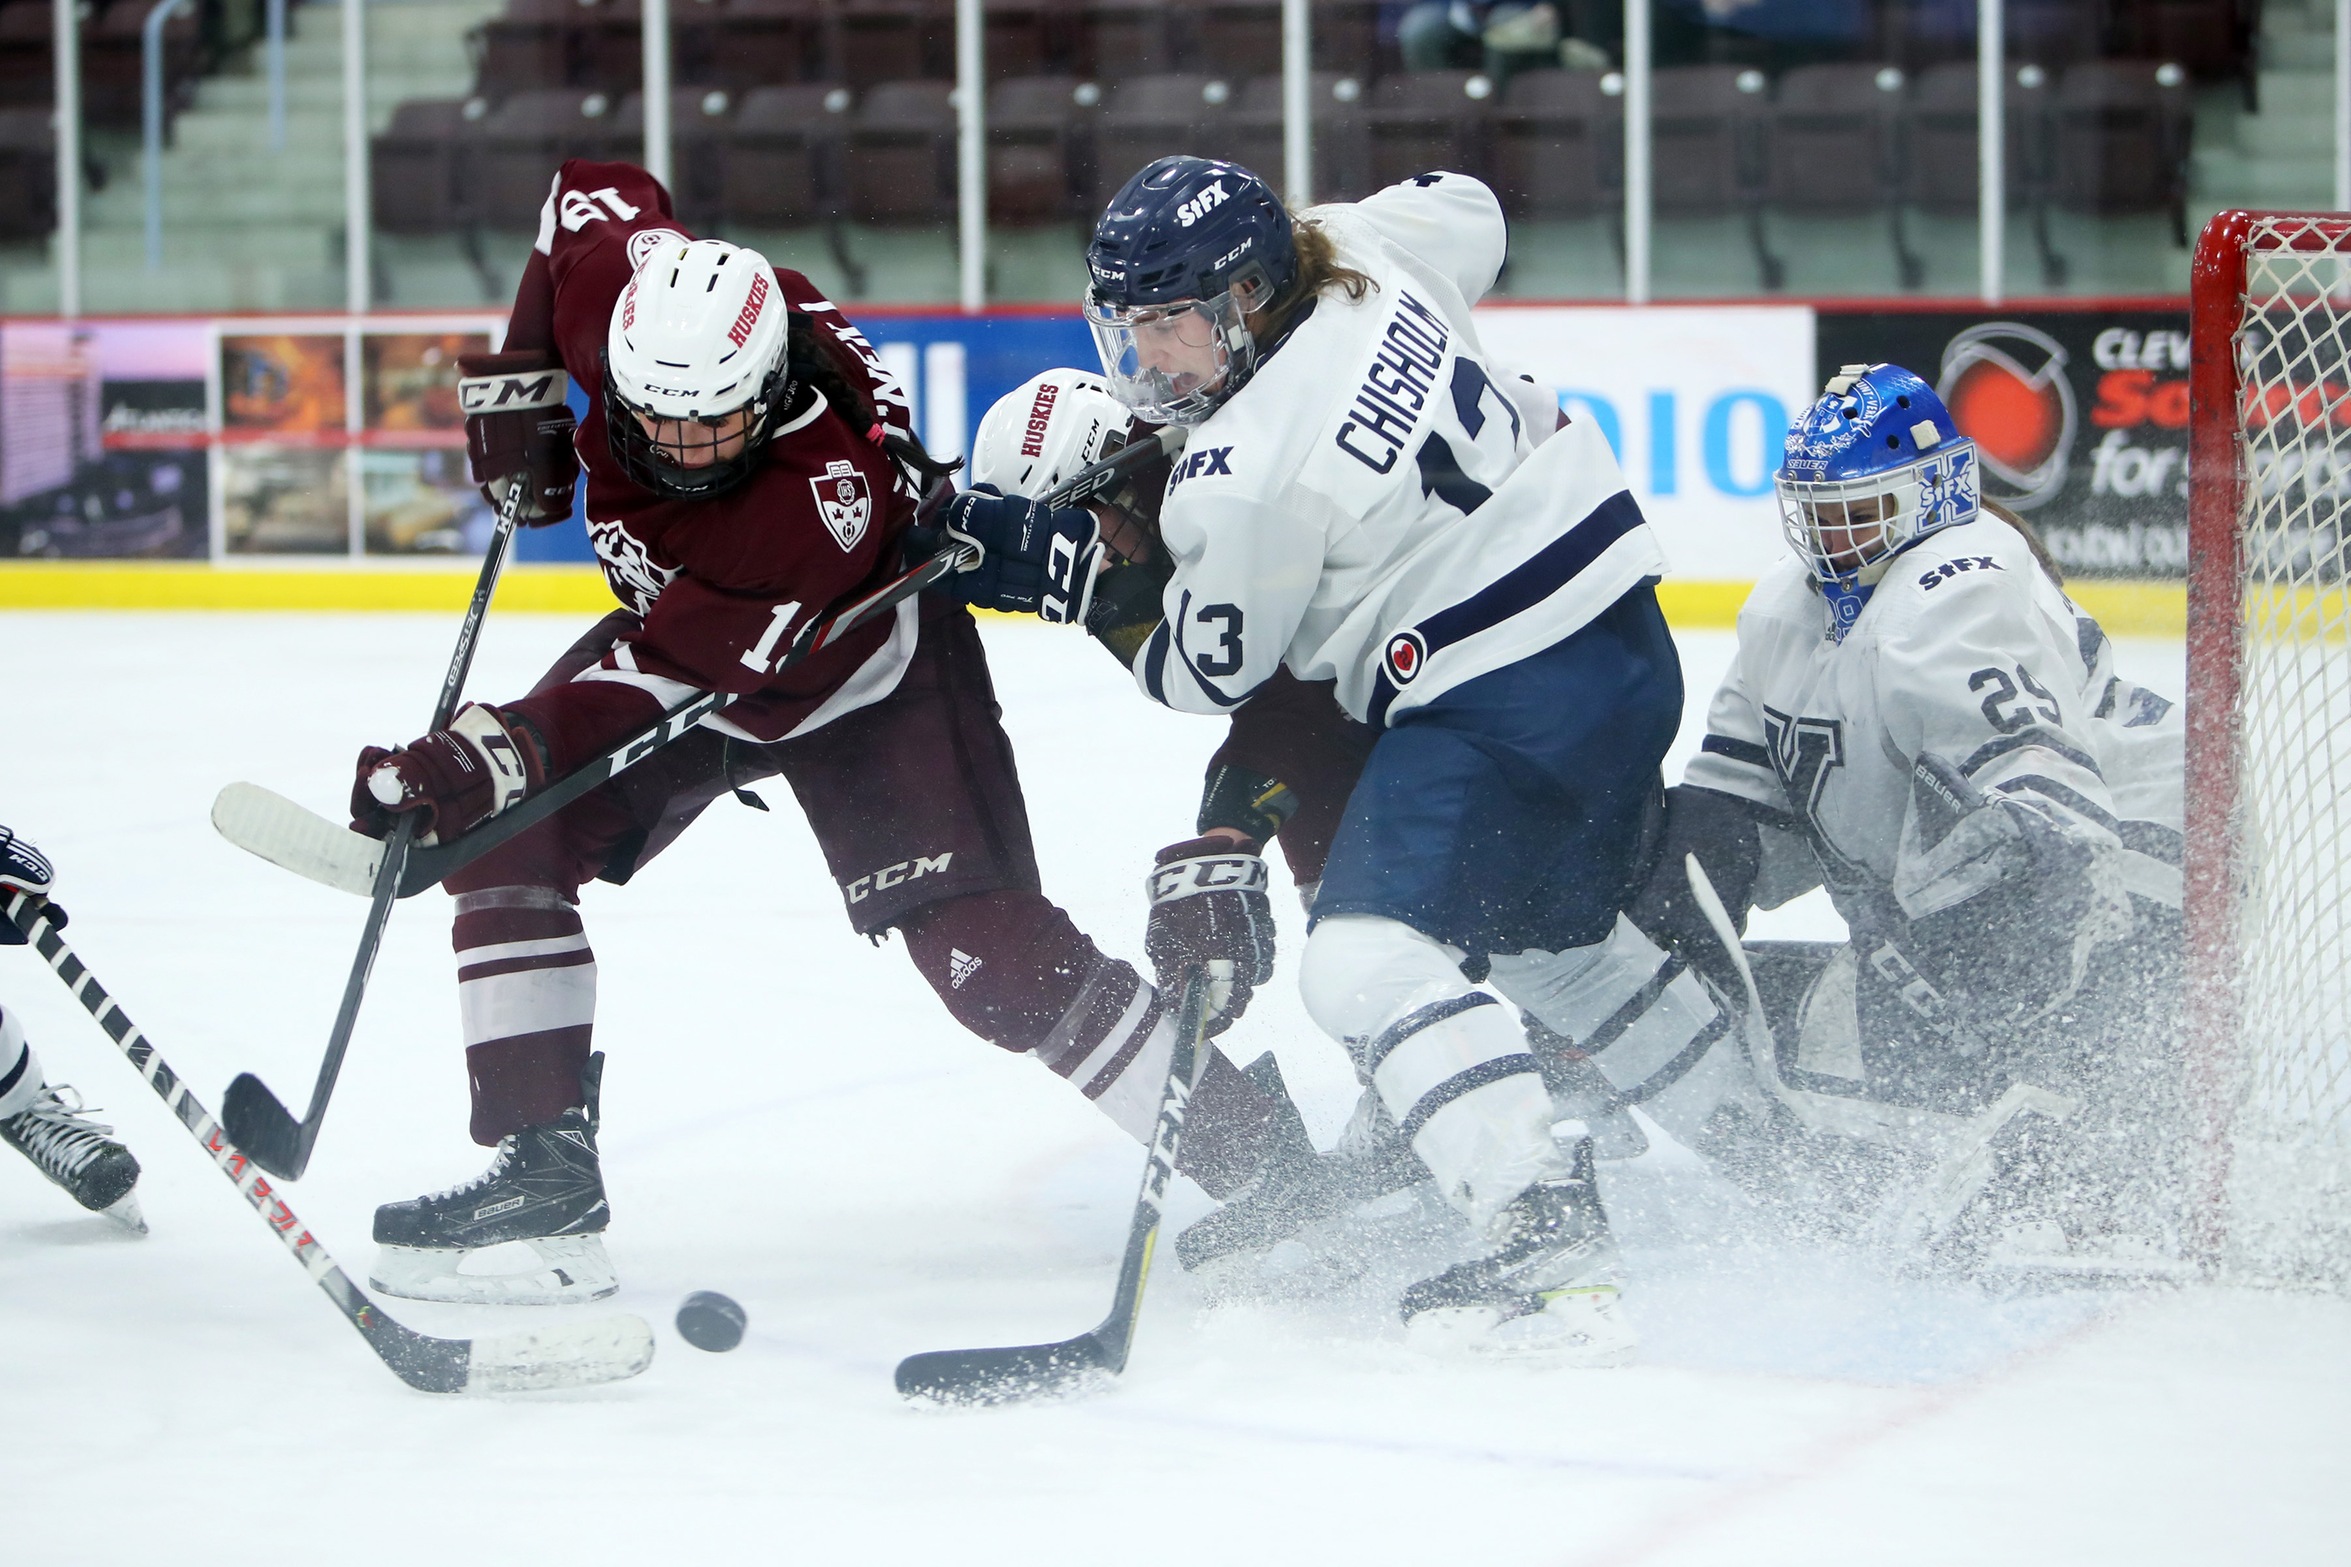 Saint Mary's Huskies forward Aimee O'Neill (#19) battles with St. FX X-Women defenceman Josie Chisholm (#13) during the X-Women come from behind 4-3 victory over the Huskies on Feb. 21, 2022.